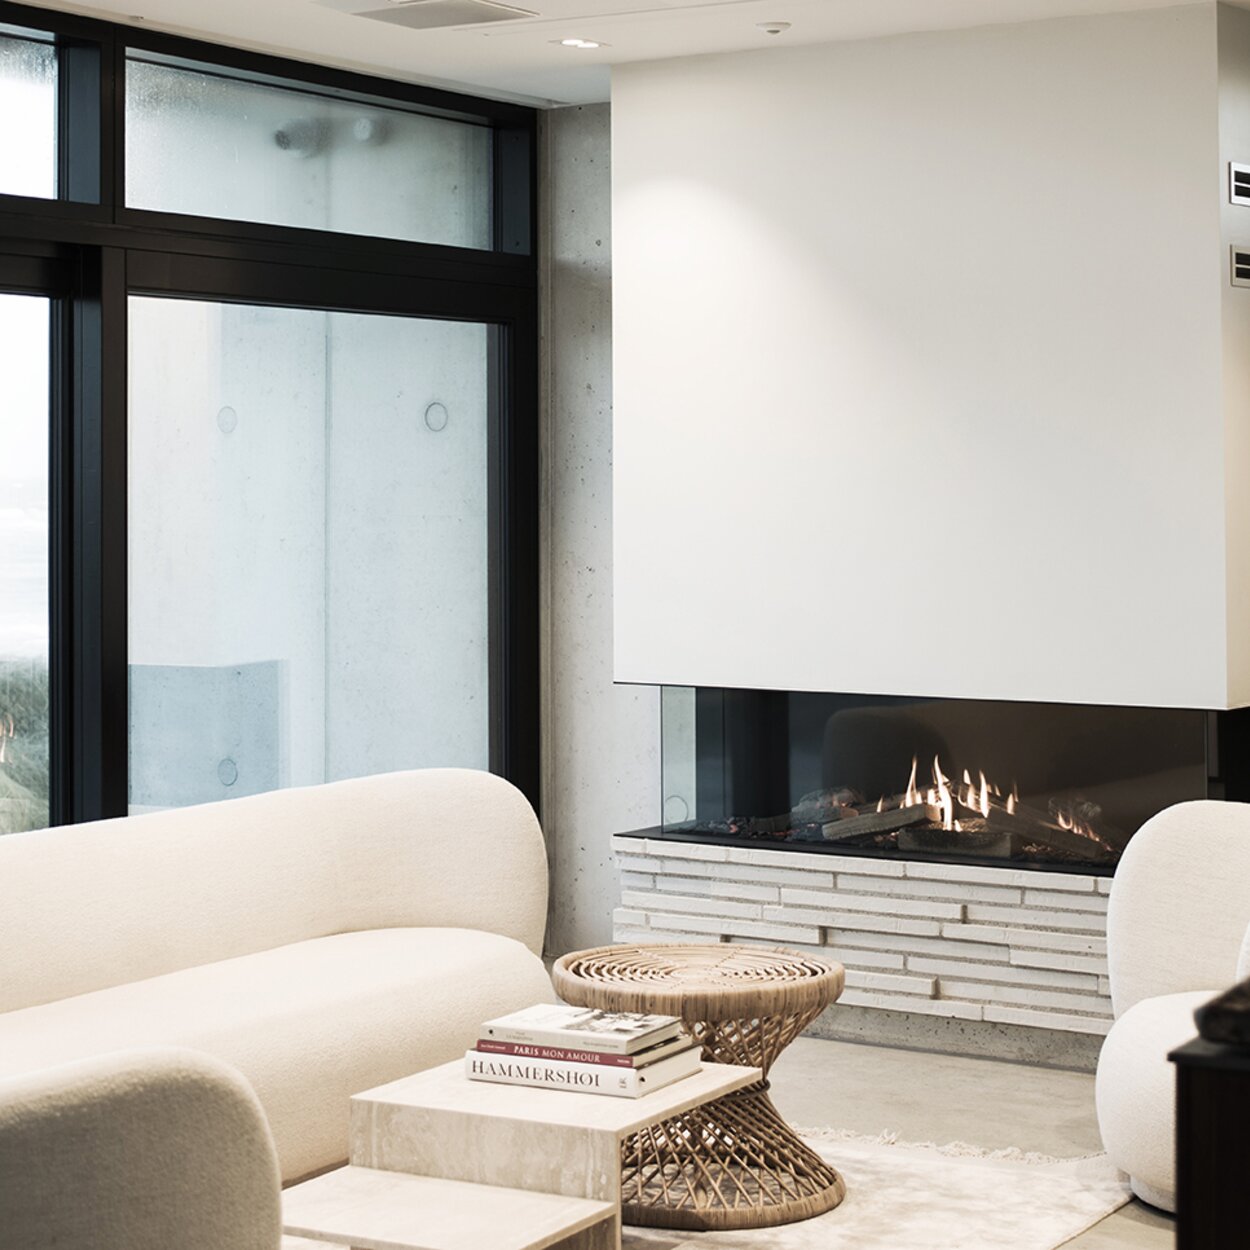 VISIO 160 gas fireplace insert with glass on three sides, white wall and modern living area